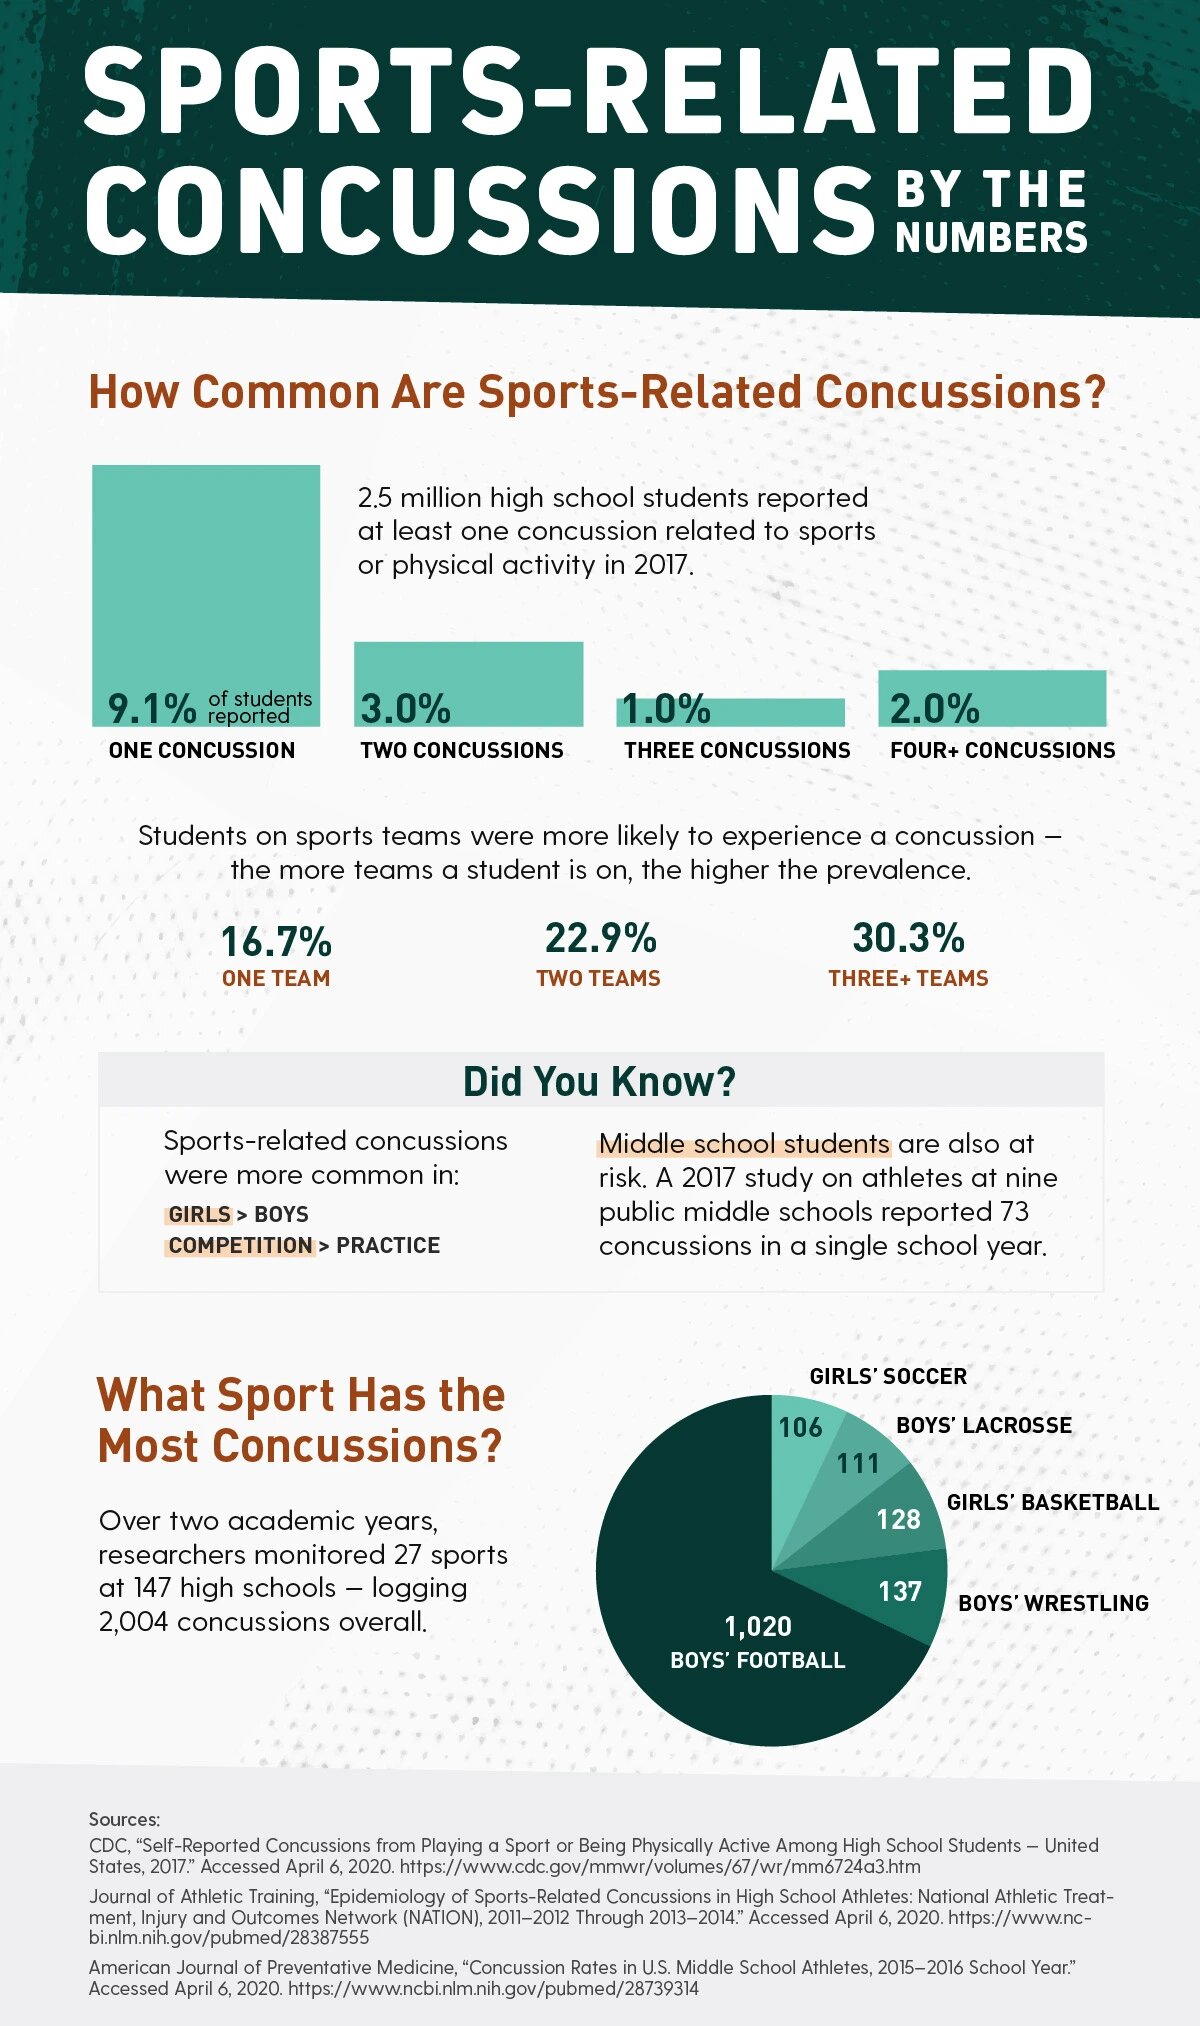 Infographic displaying statistics about the incidence of sports-related concussions in high school and middle school sports